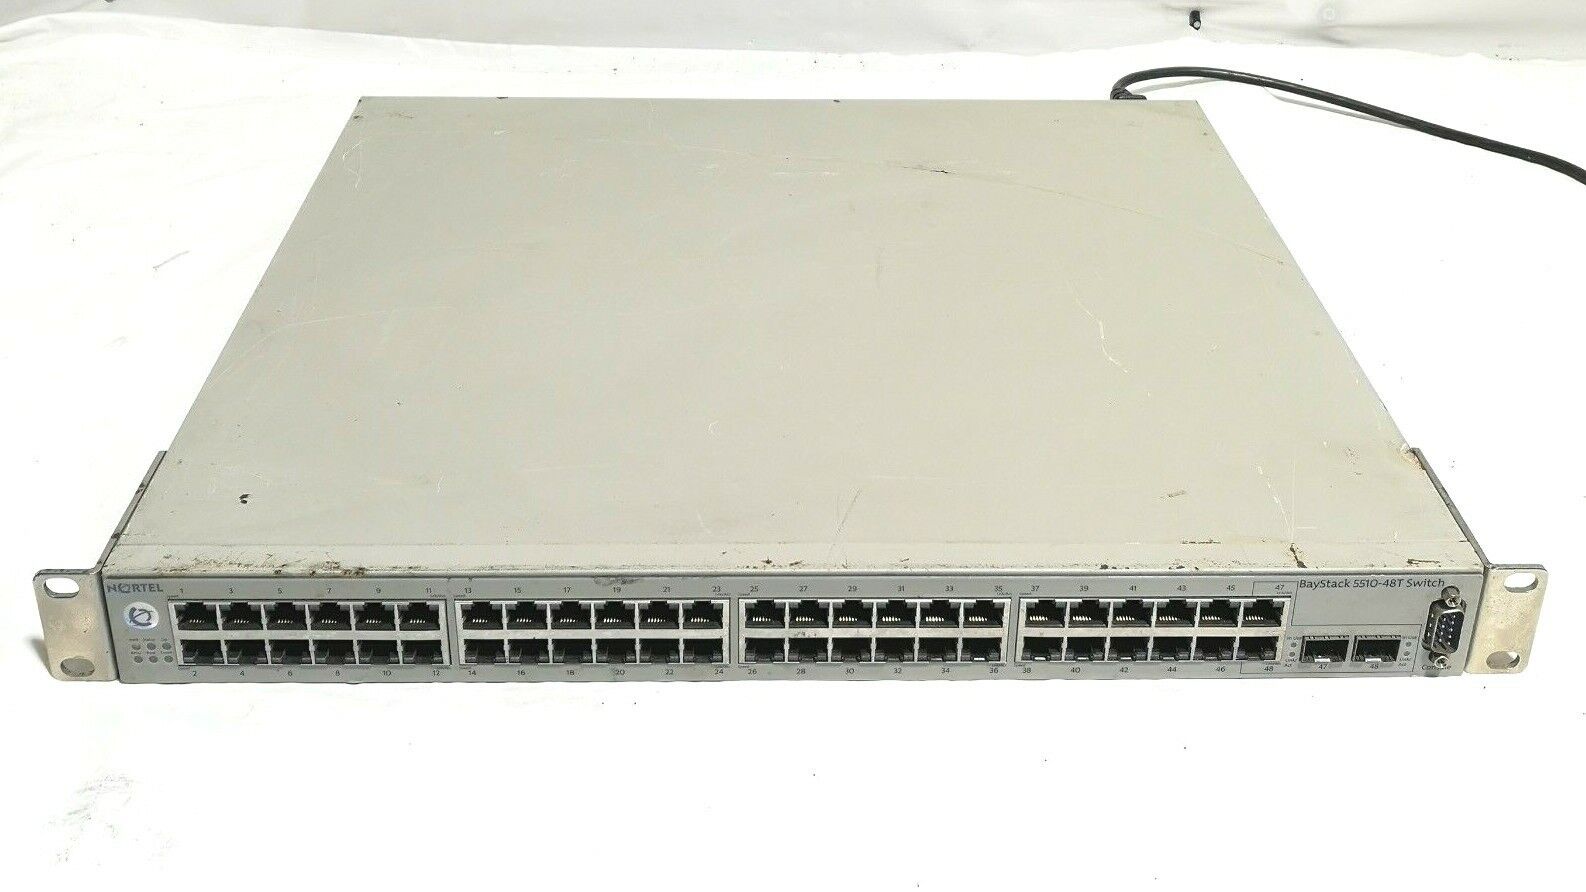 Nortel Avaya 5510-48T 48-Port Ethernet Routing Switch BS5510-48T